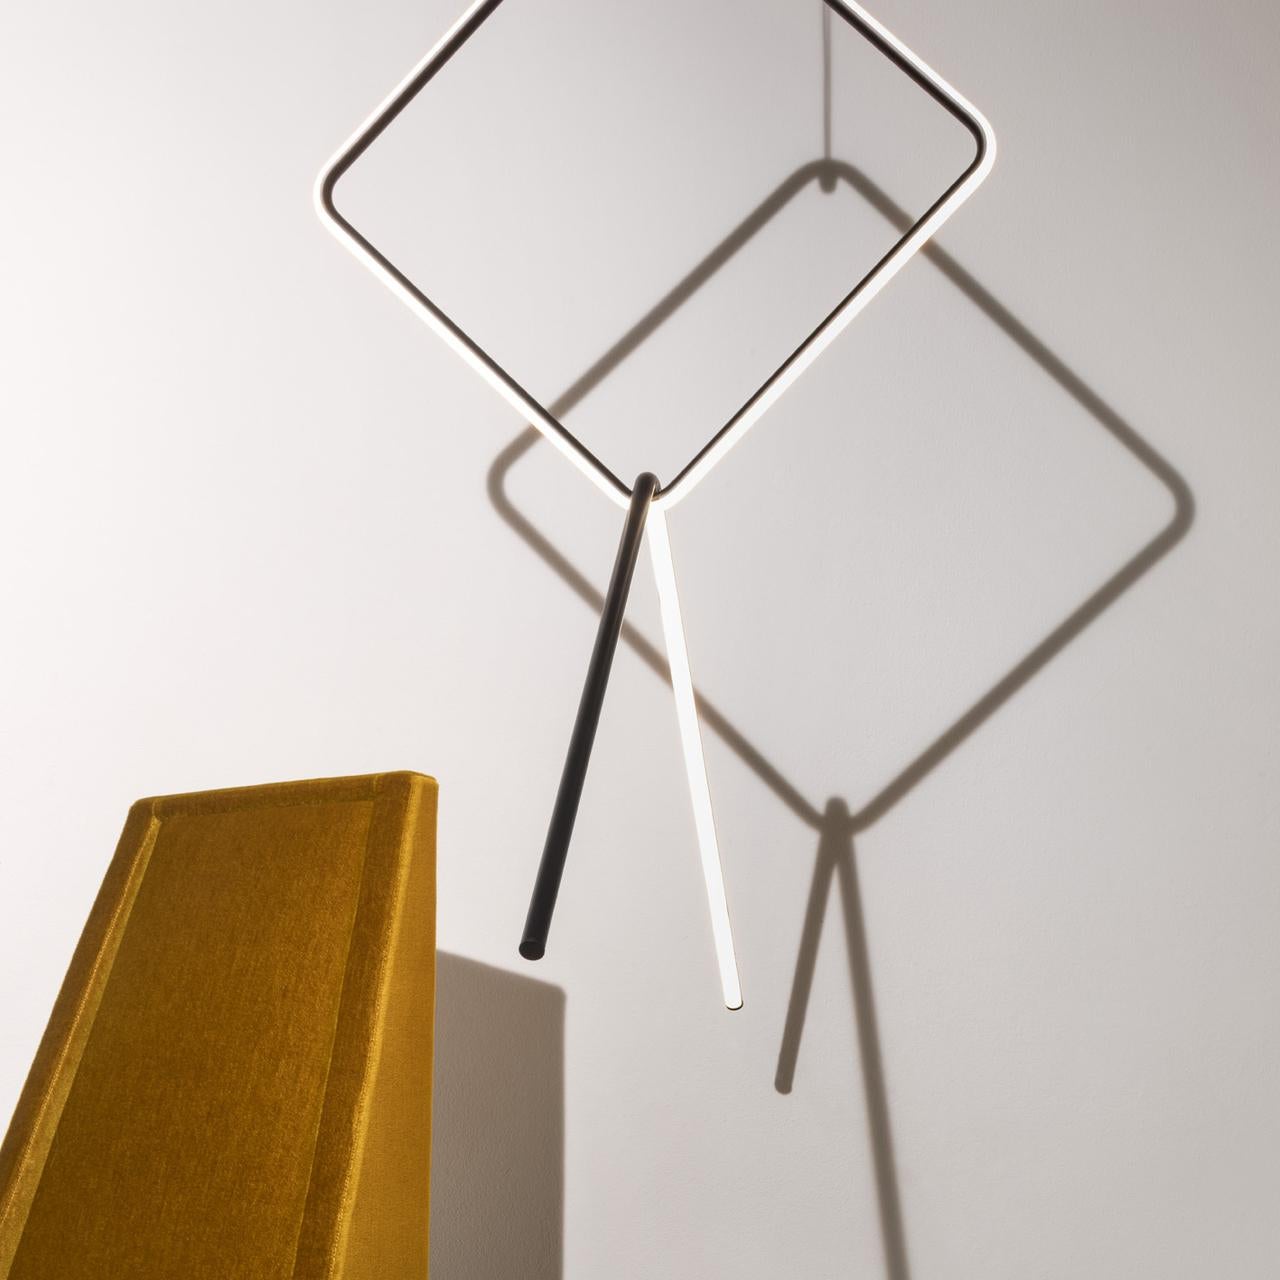 Italian FLOS Small Square and Drop Down Arrangements Light by Michael Anastassiades For Sale